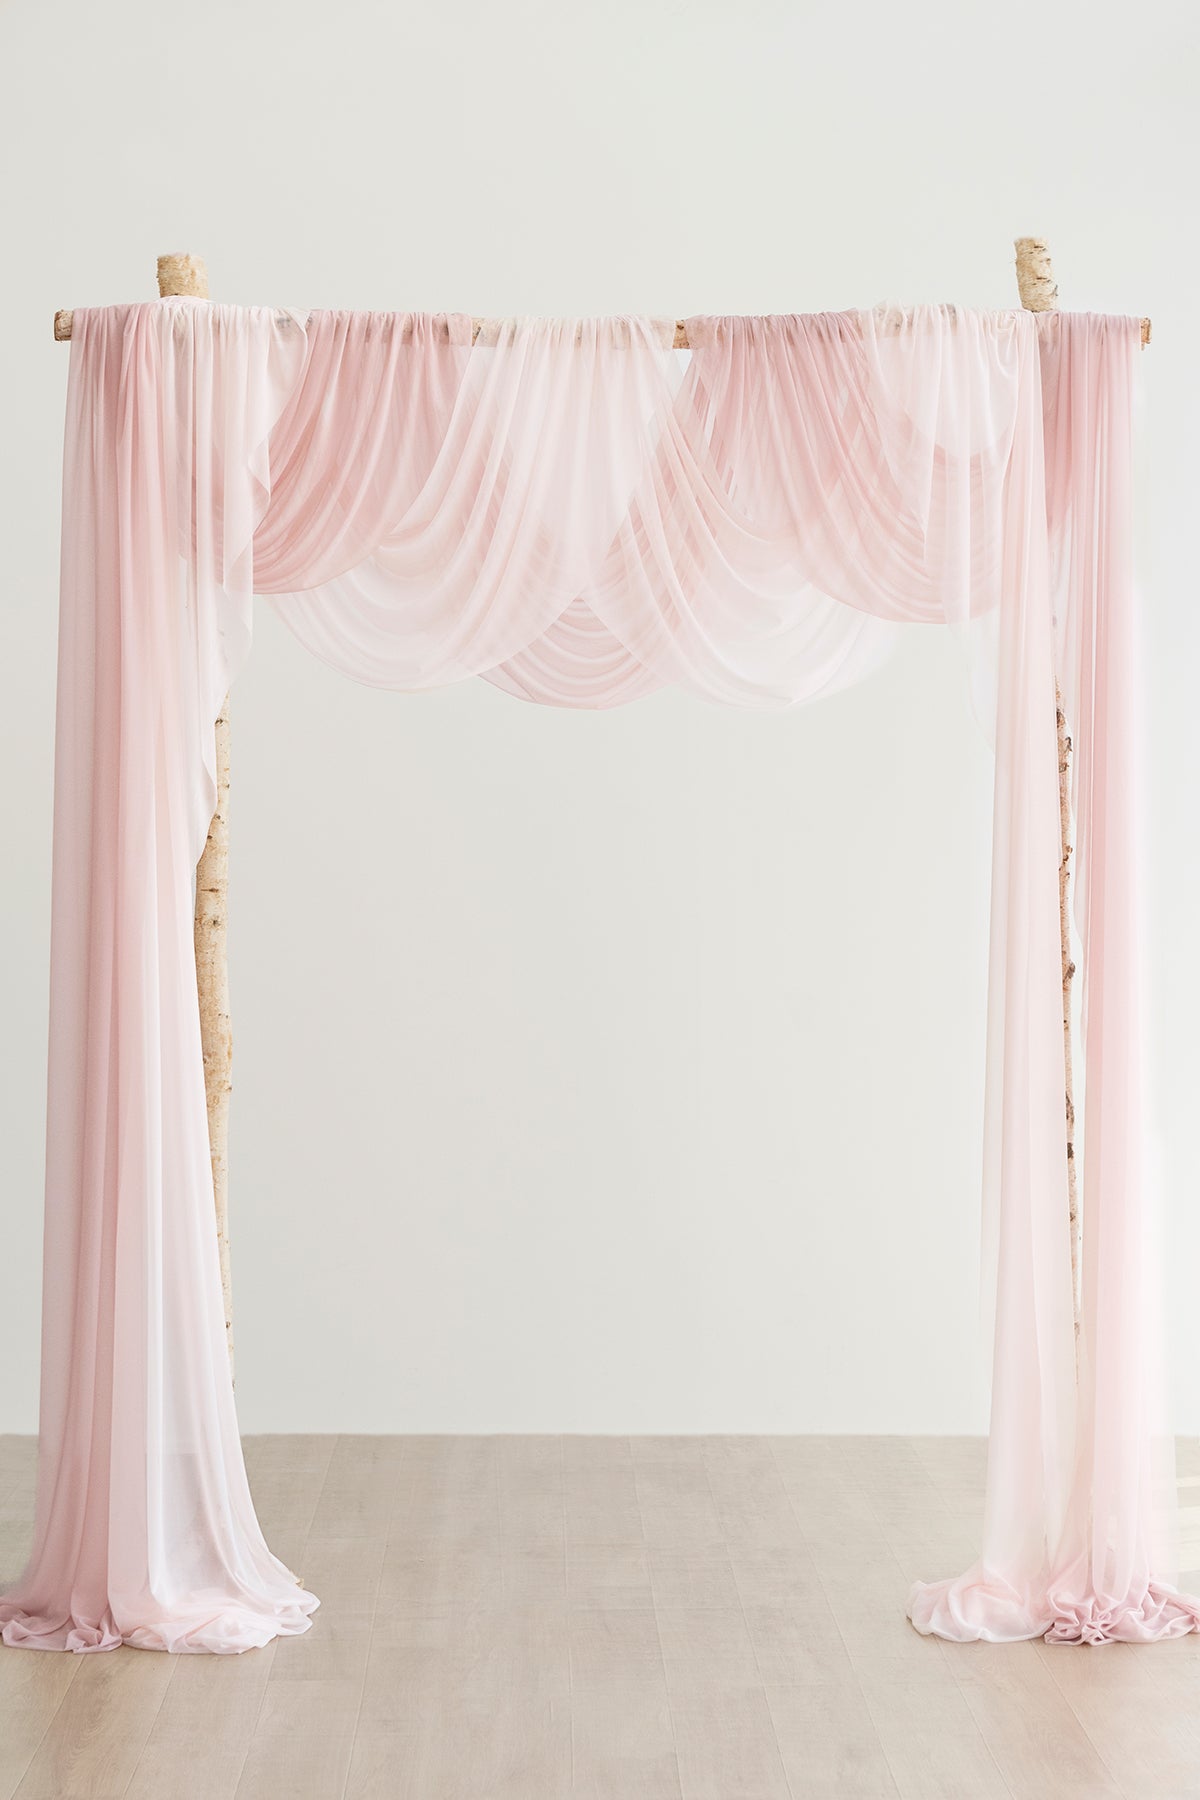 Wedding Arch Draping in Dusty Rose & Blush | Clearance